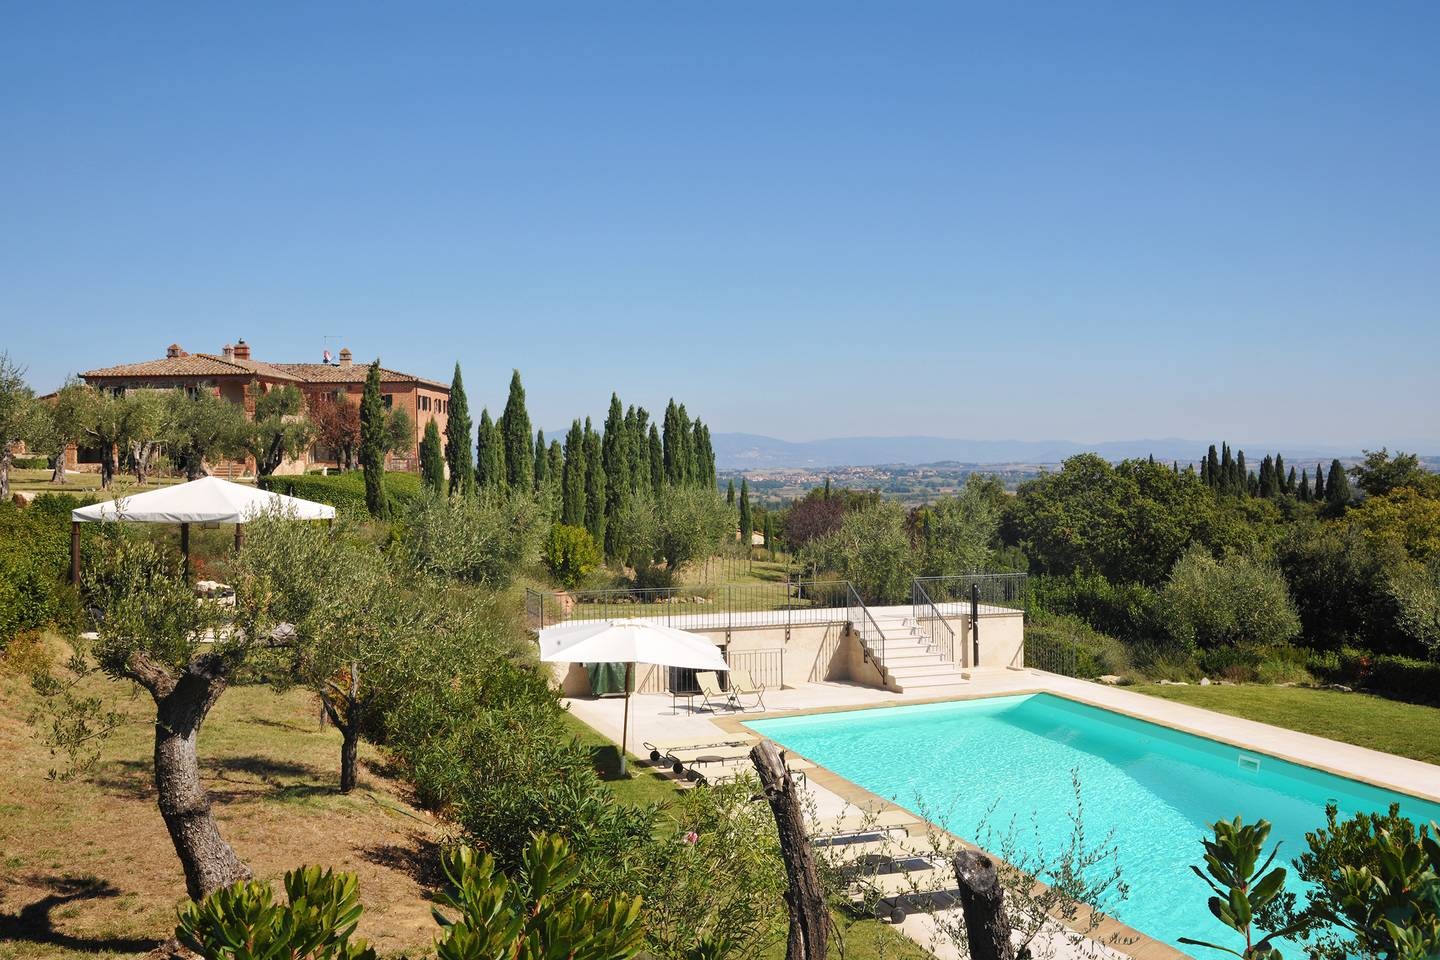 Villa for sale near the medieval town of Montepulciano, Tuscany